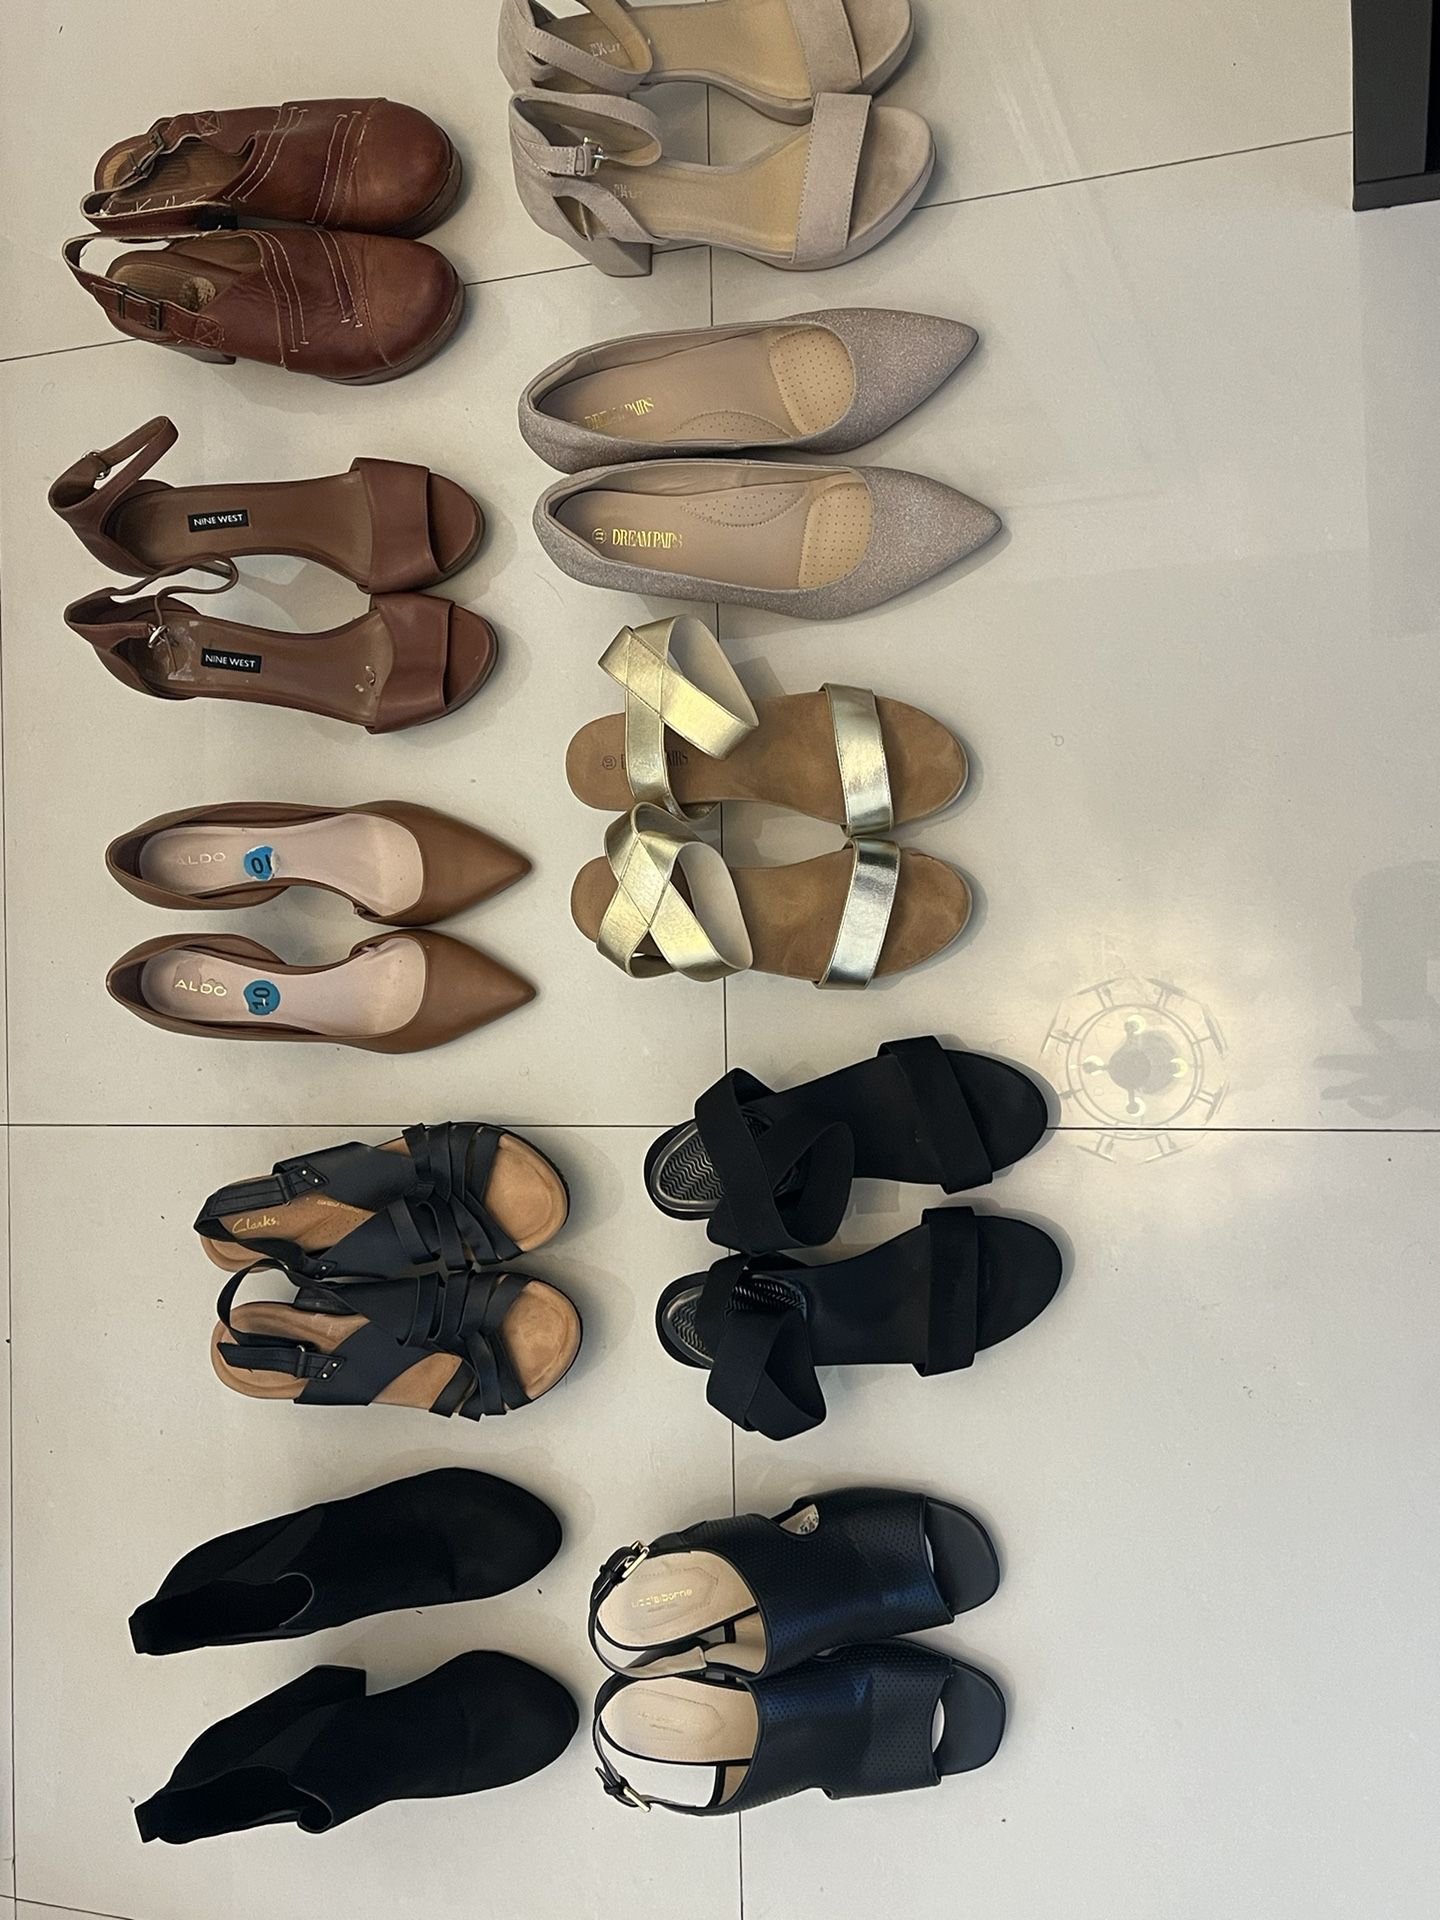 Women’s Shoes Size 10-11 For $10-20